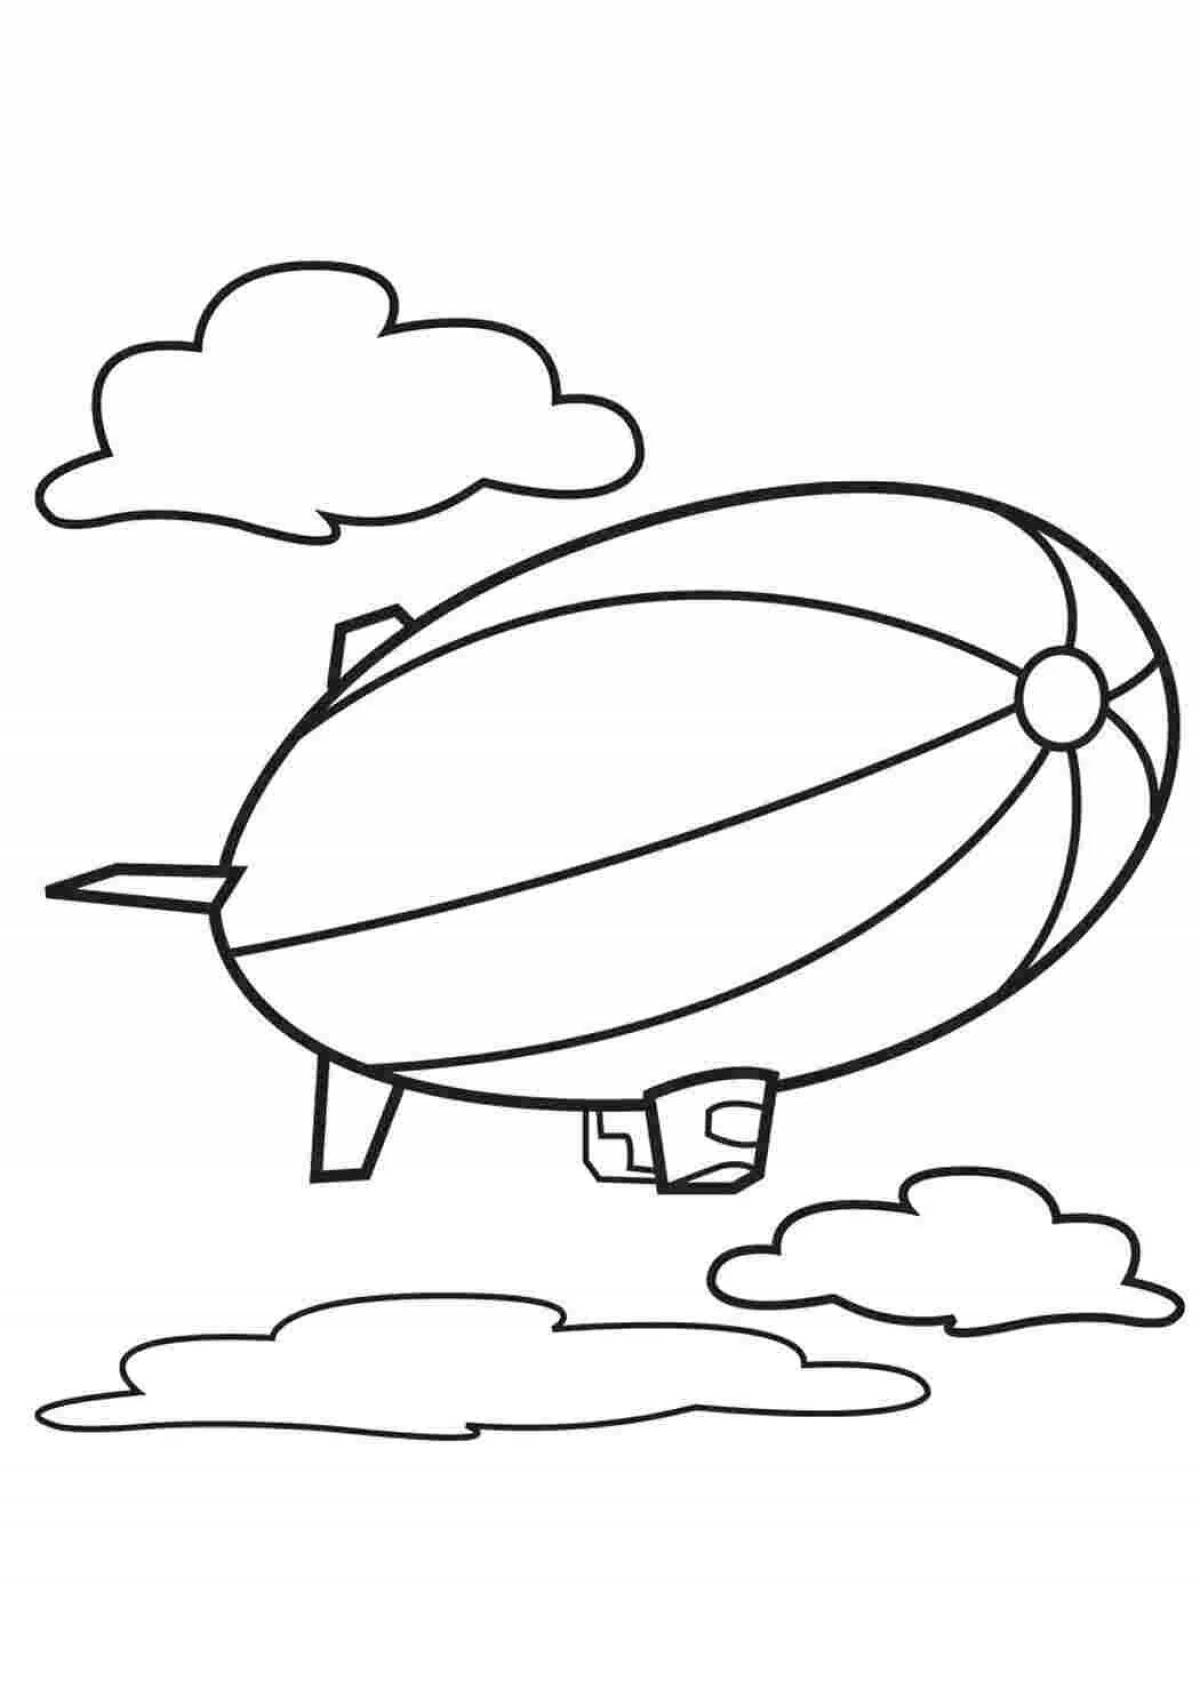 Colorful airship coloring pages for kids